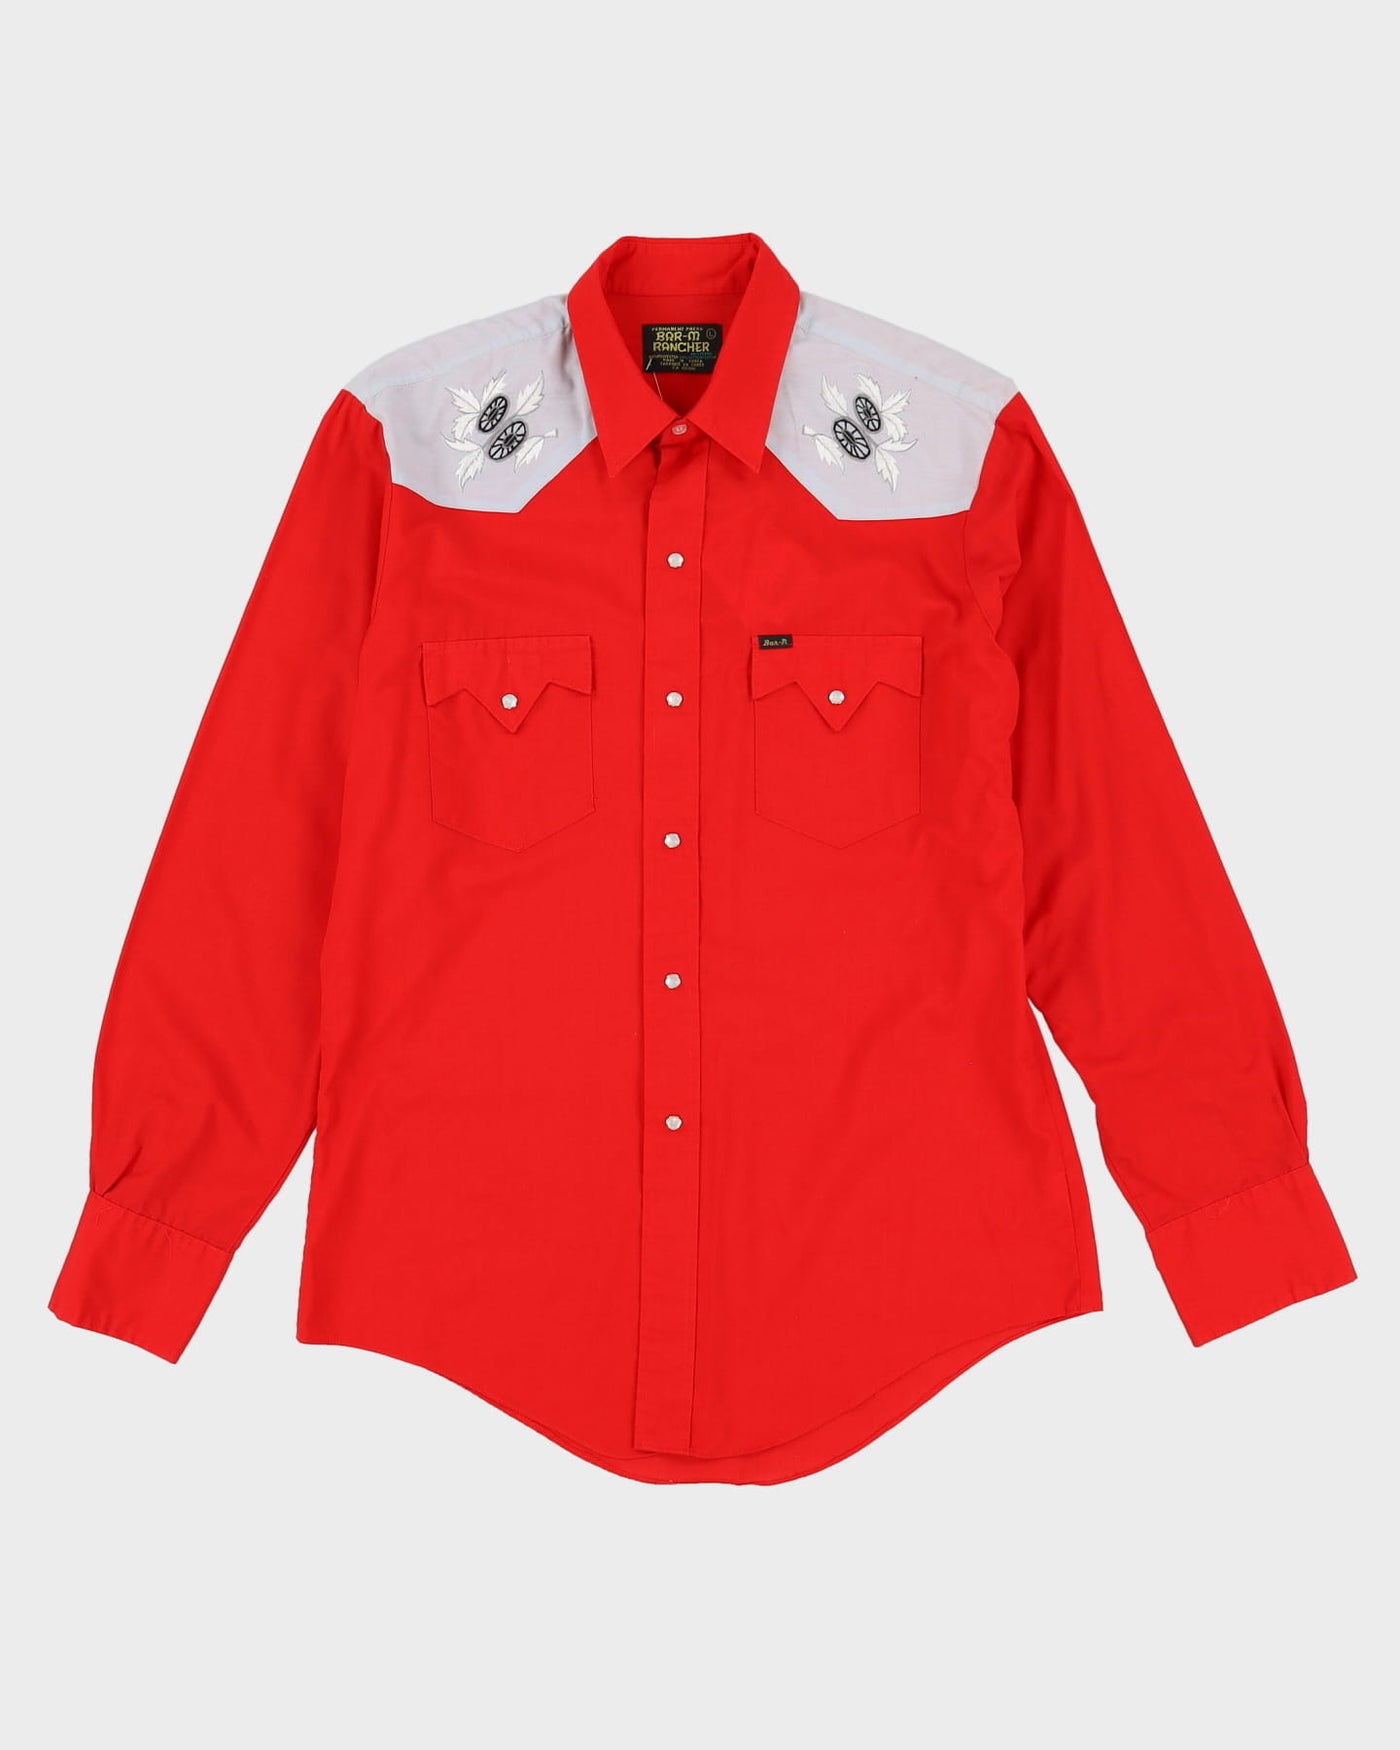 Vintage 80s Bar-M Rancher Red Western Style Shirt - L